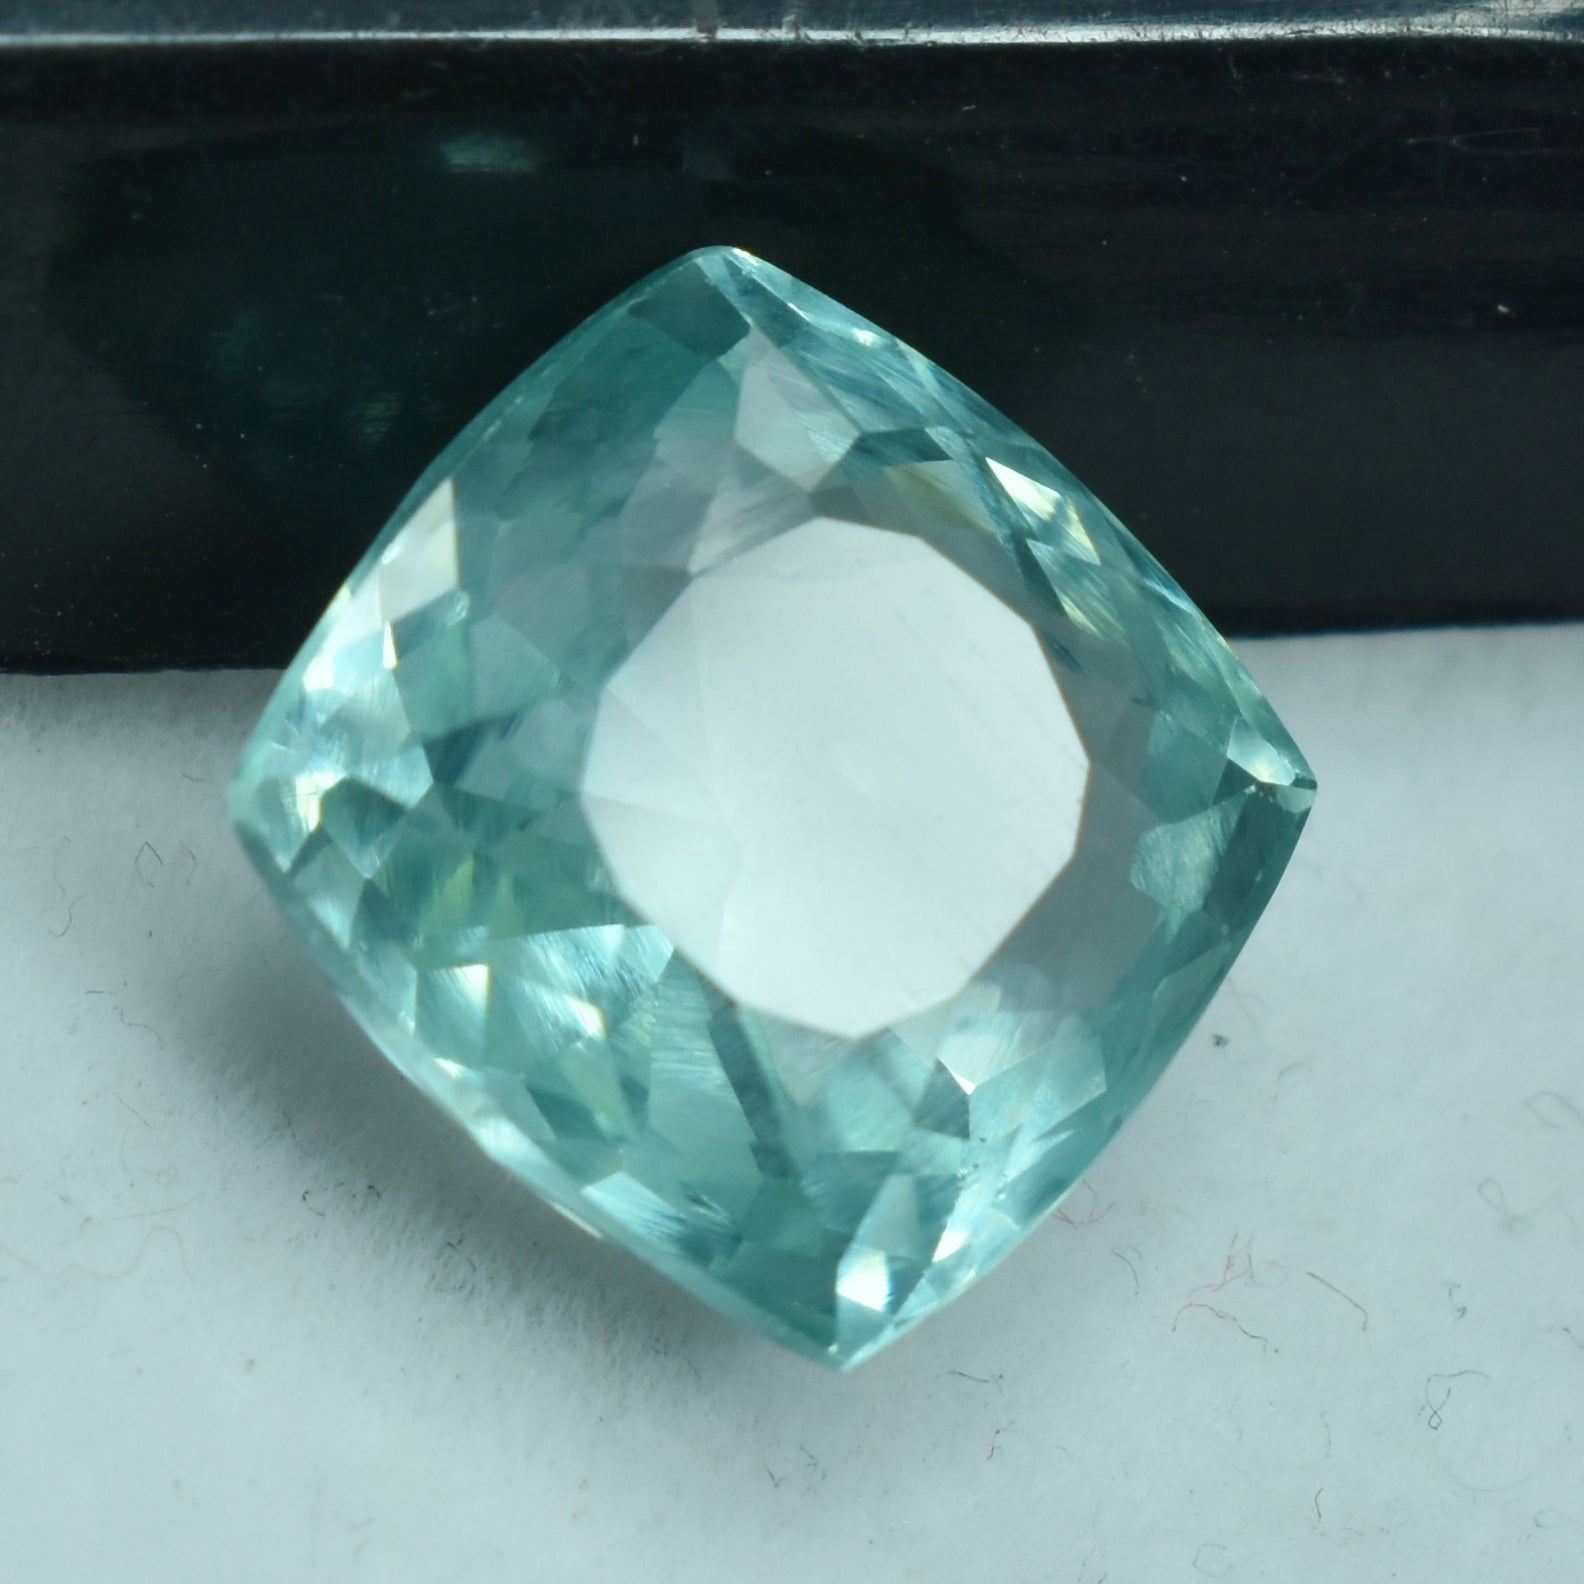 Sapphire Jewelry Montana Sapphire 7.60 Carat Bluish Green Color Square Cushion Shape Natural Certified Loose Gemstone